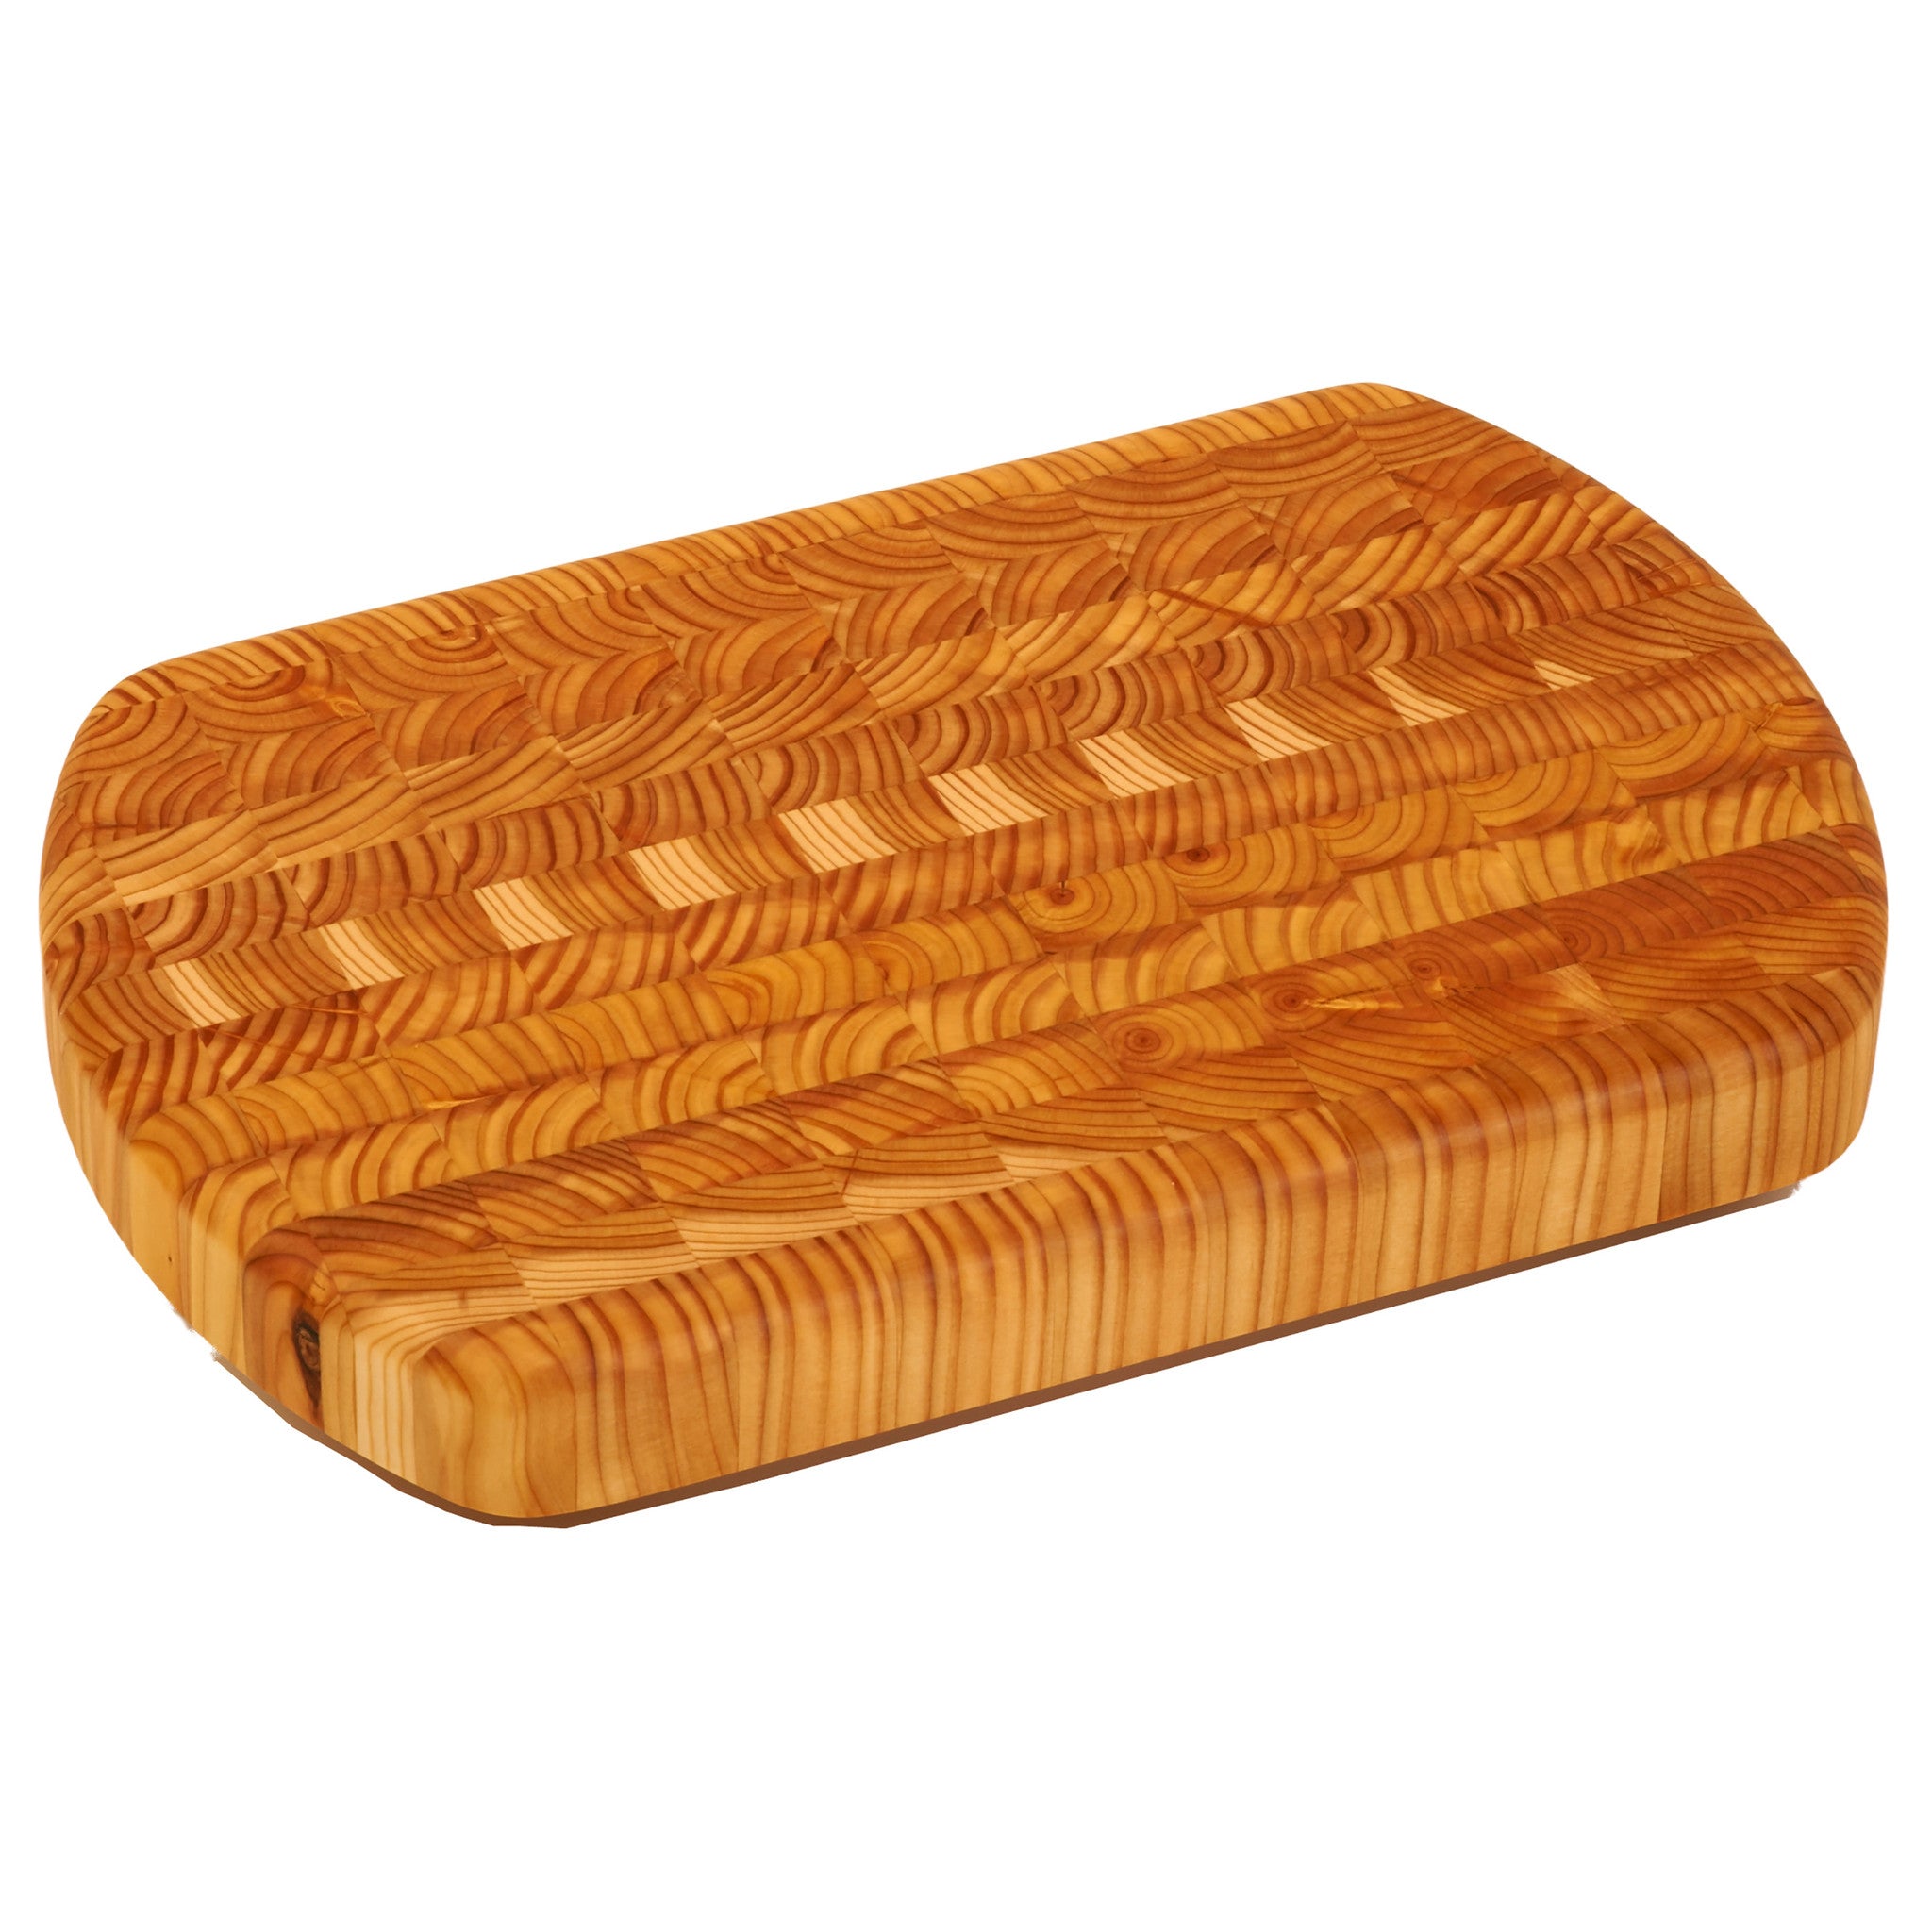 Larch Wood Ki Small KISM End Grain Cutting Board – Sweetheart Gallery:  Contemporary Craft Gallery, Fine American Craft, Art, Design, Handmade Home  & Personal Accessories